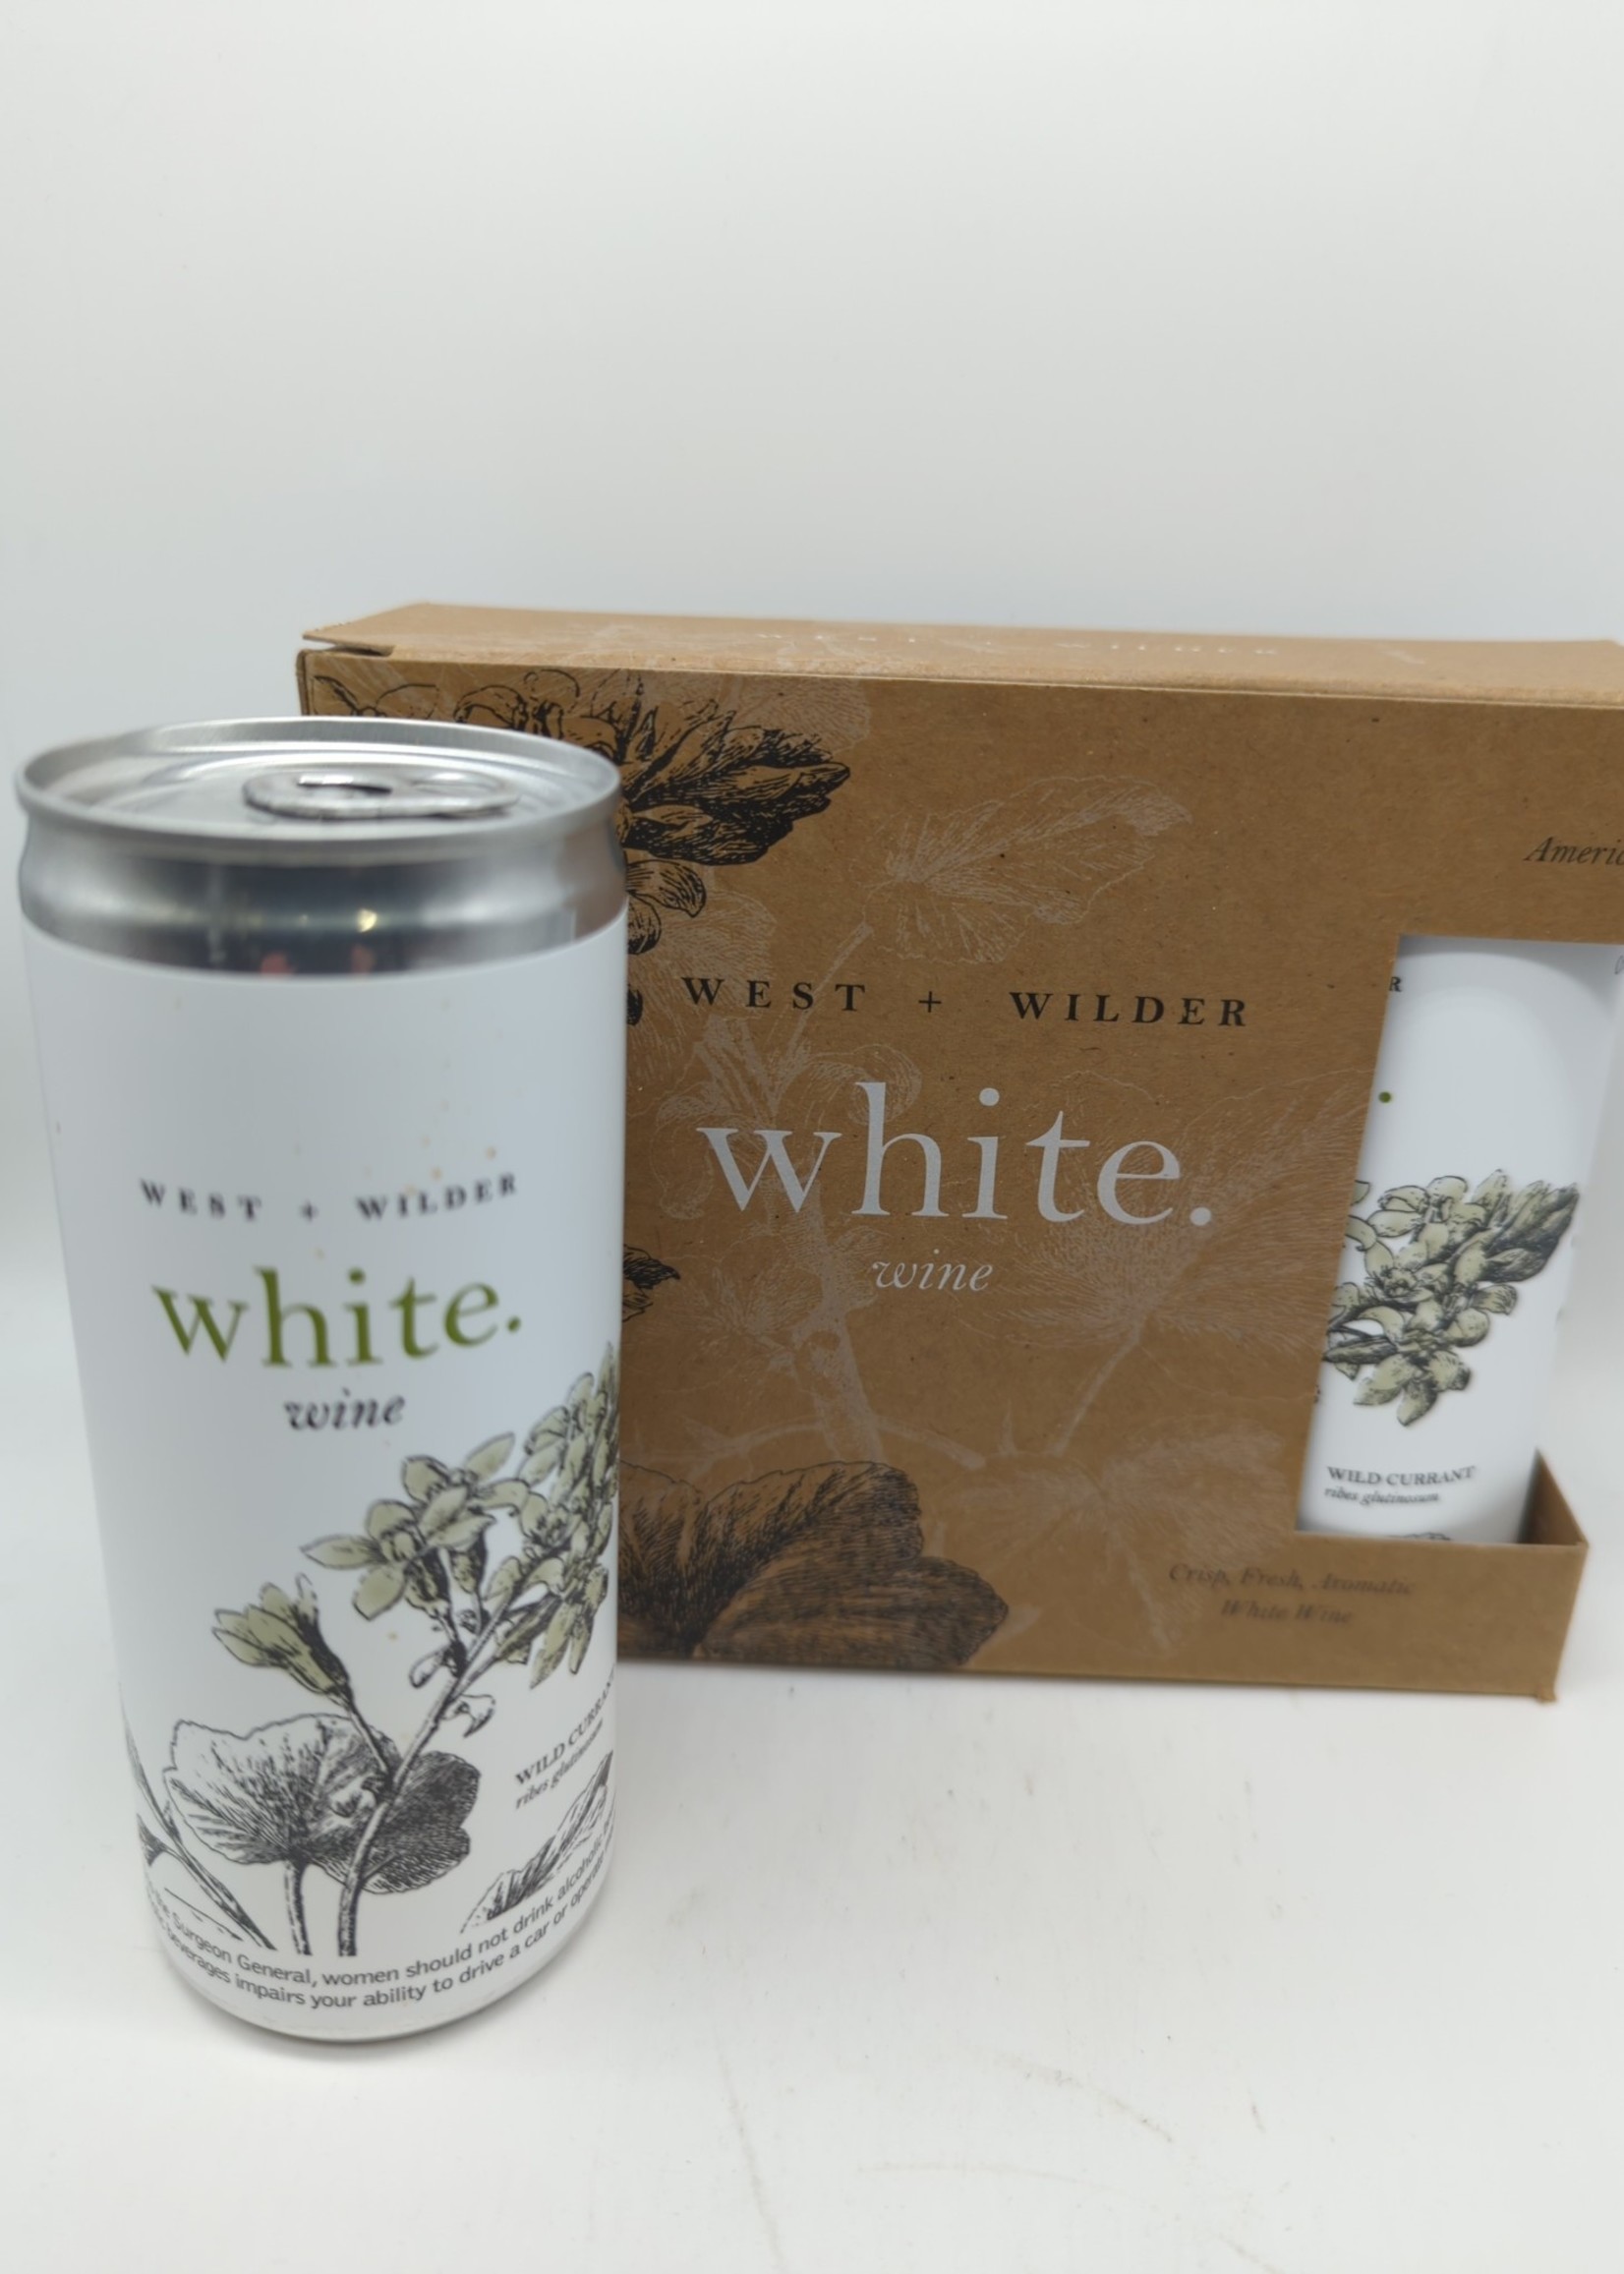 WEST & WILDER WHITE 3-Pack cans